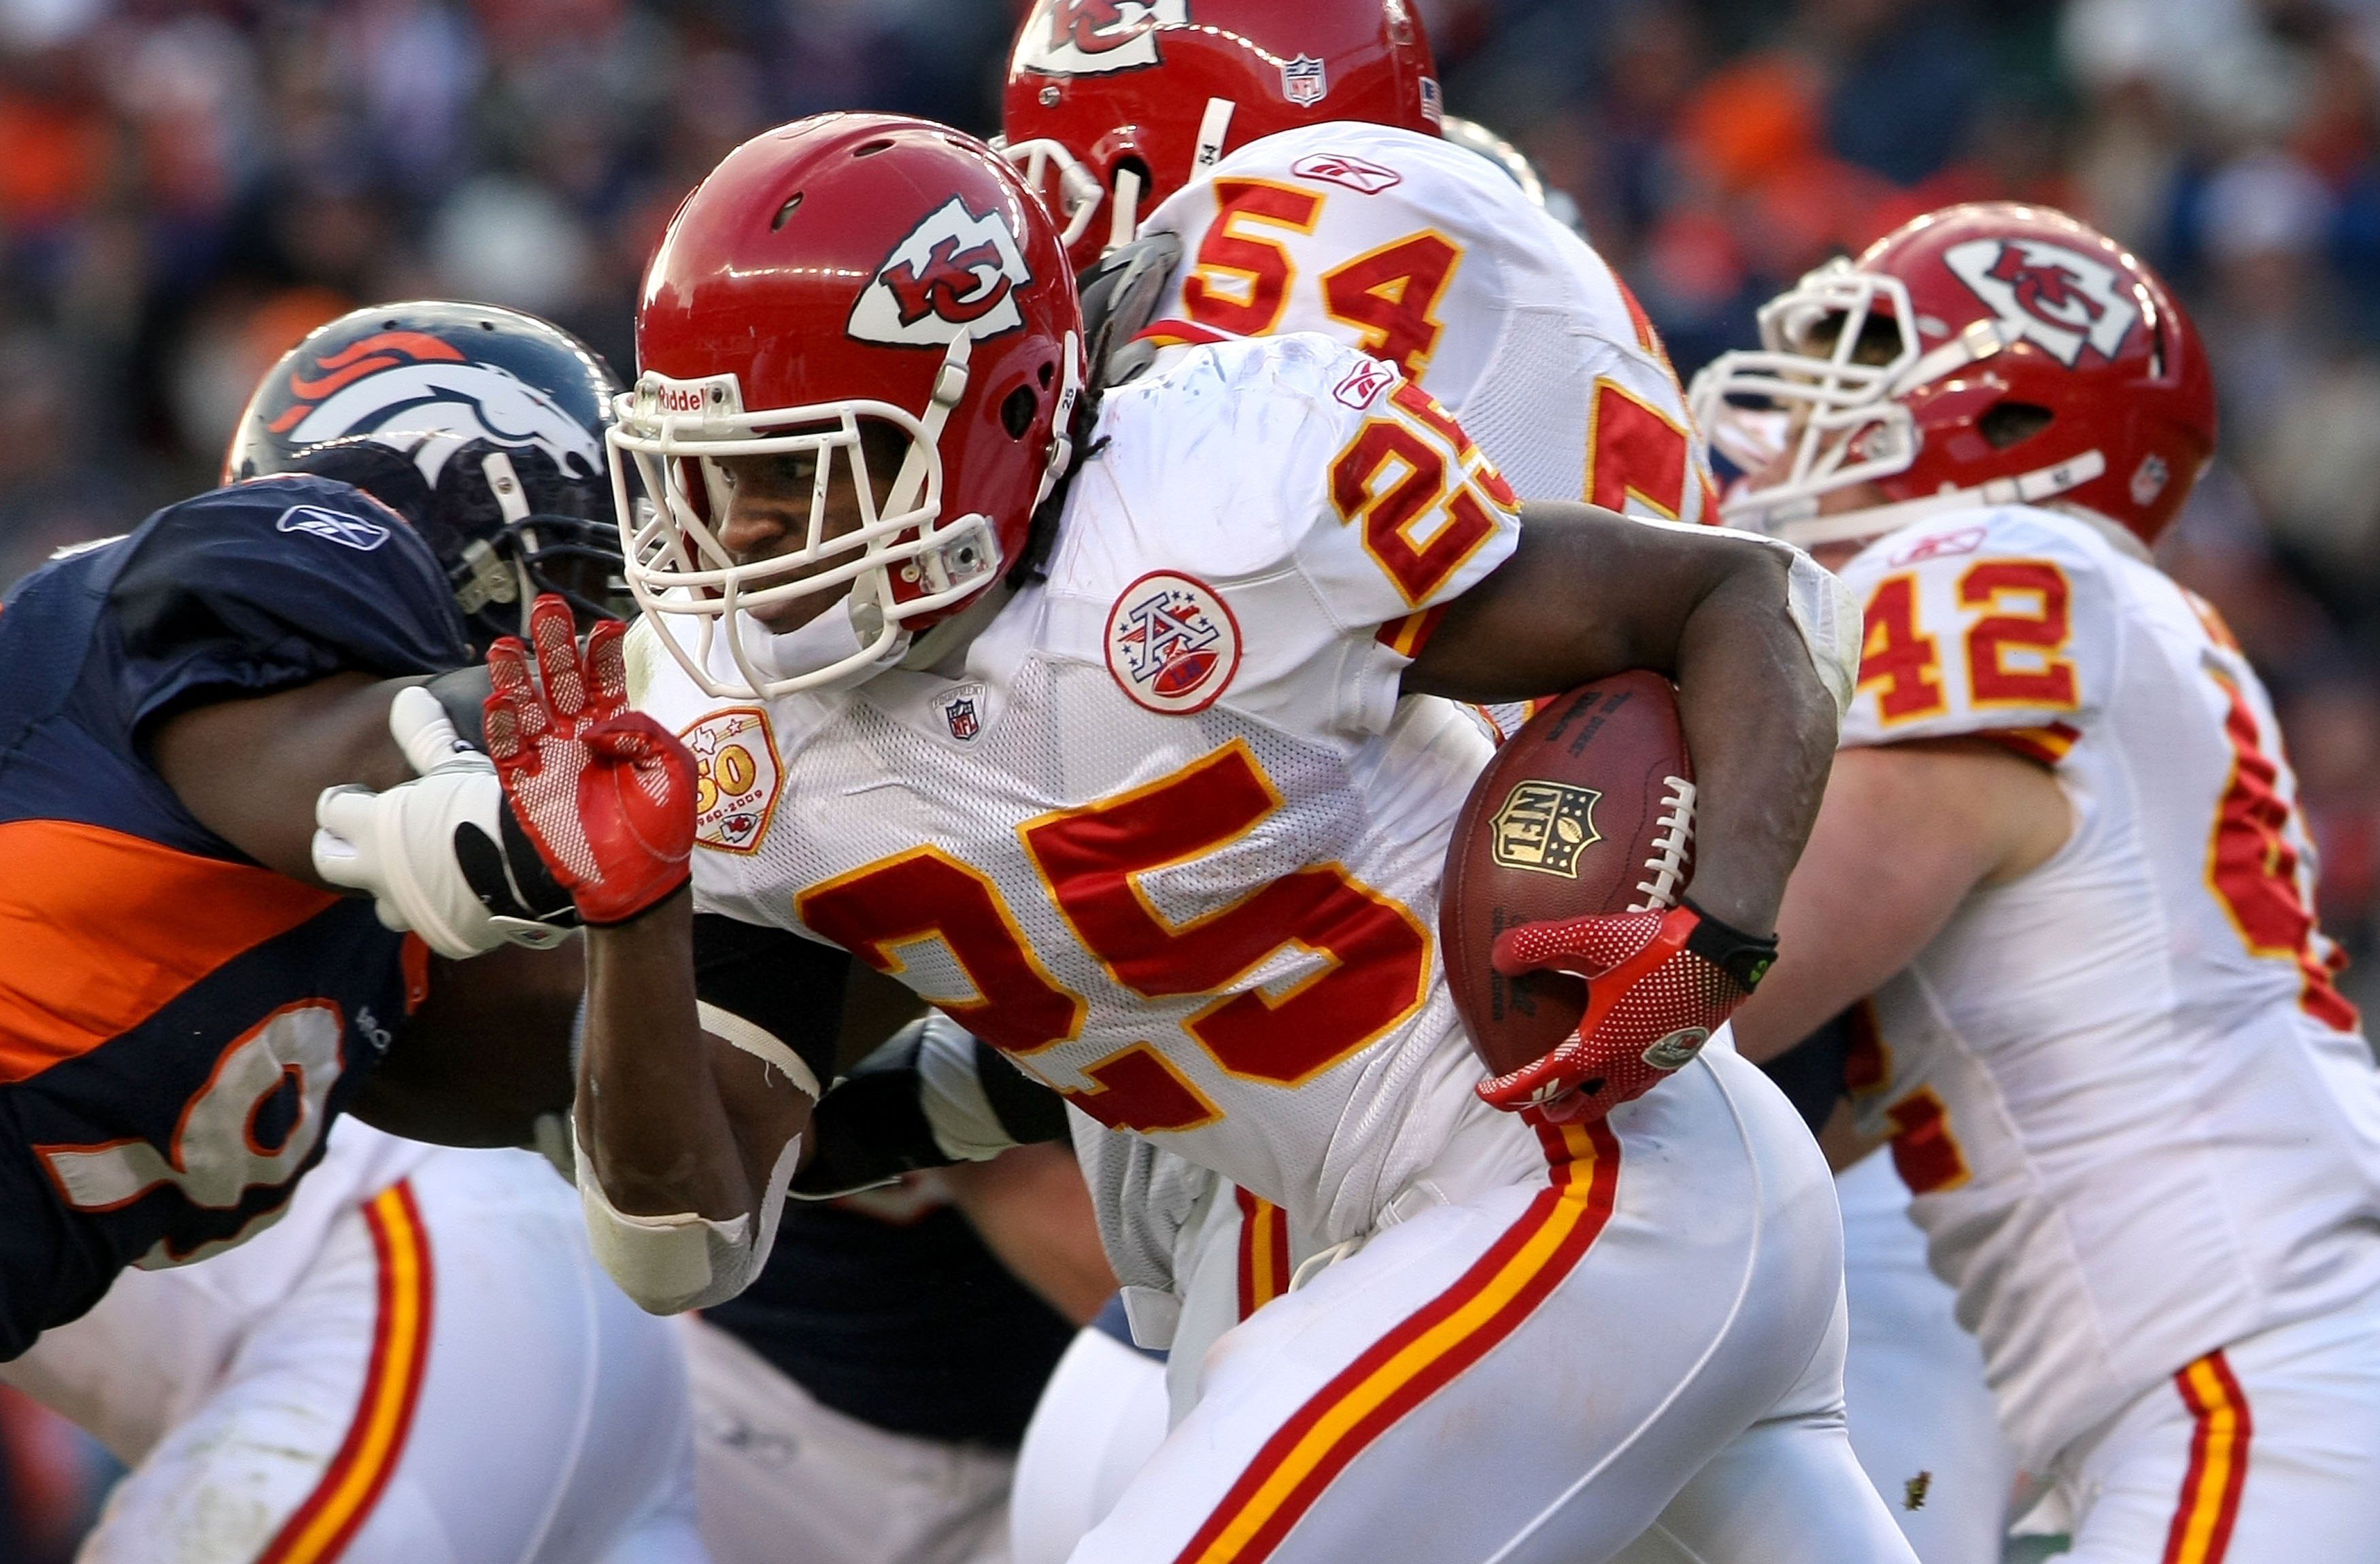 DENVER - JANUARY 03: Jamaal Charles #25 of the Kansas City Chiefs rushes against the Denver Broncos at Invesco Field at Mile High on January 3, 2010 in Denver, Colorado. (Photo by Doug Pensinger/Getty Images)